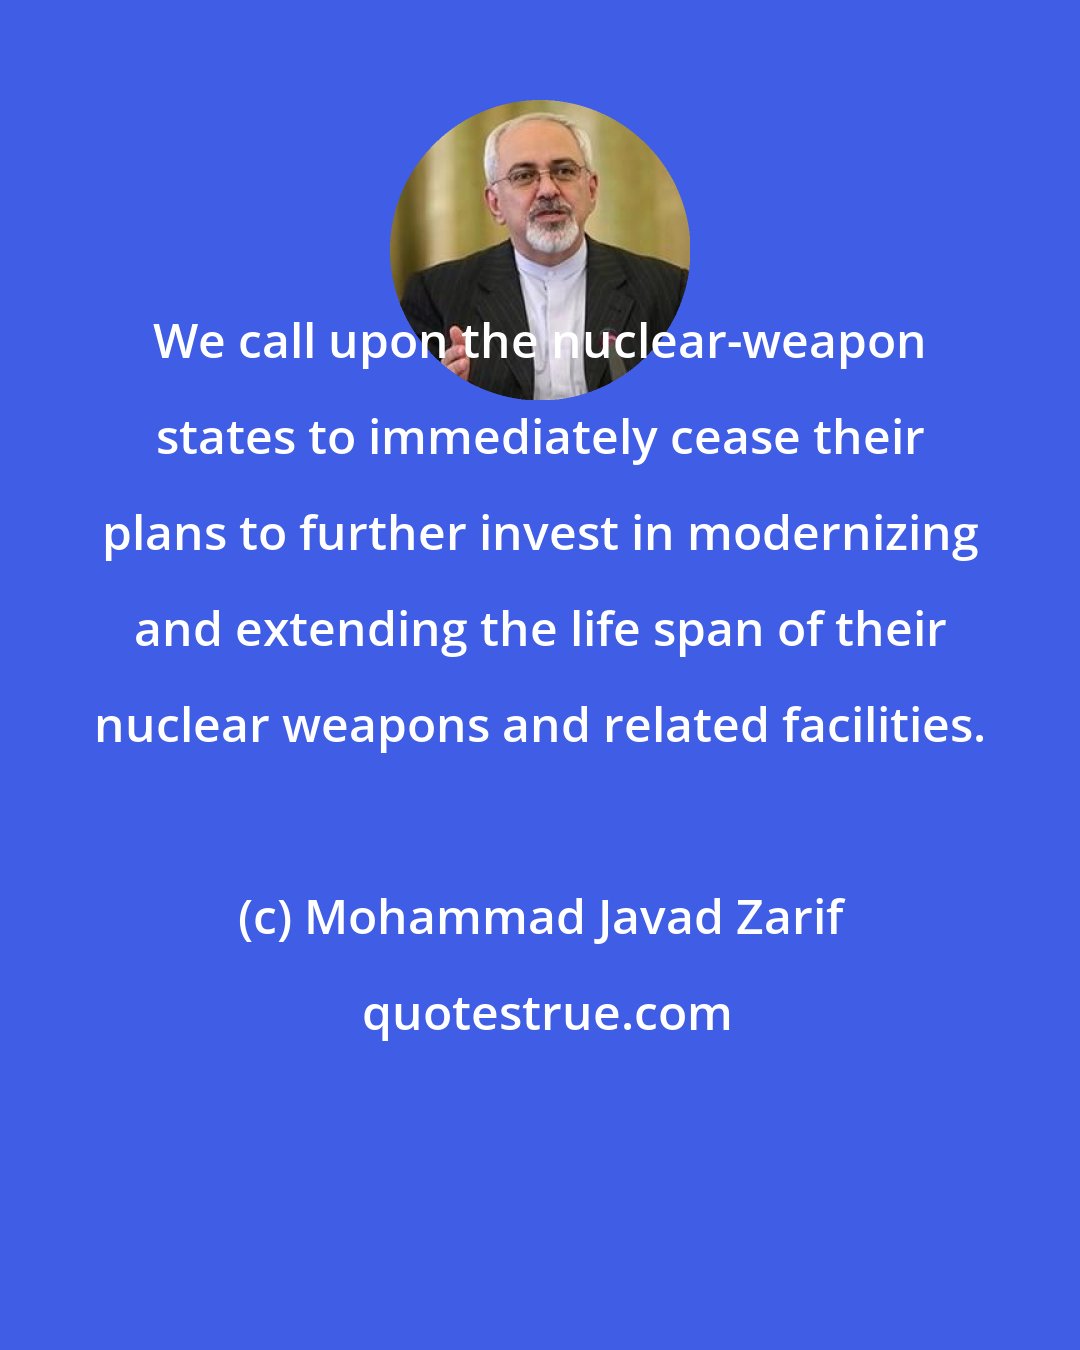 Mohammad Javad Zarif: We call upon the nuclear-weapon states to immediately cease their plans to further invest in modernizing and extending the life span of their nuclear weapons and related facilities.